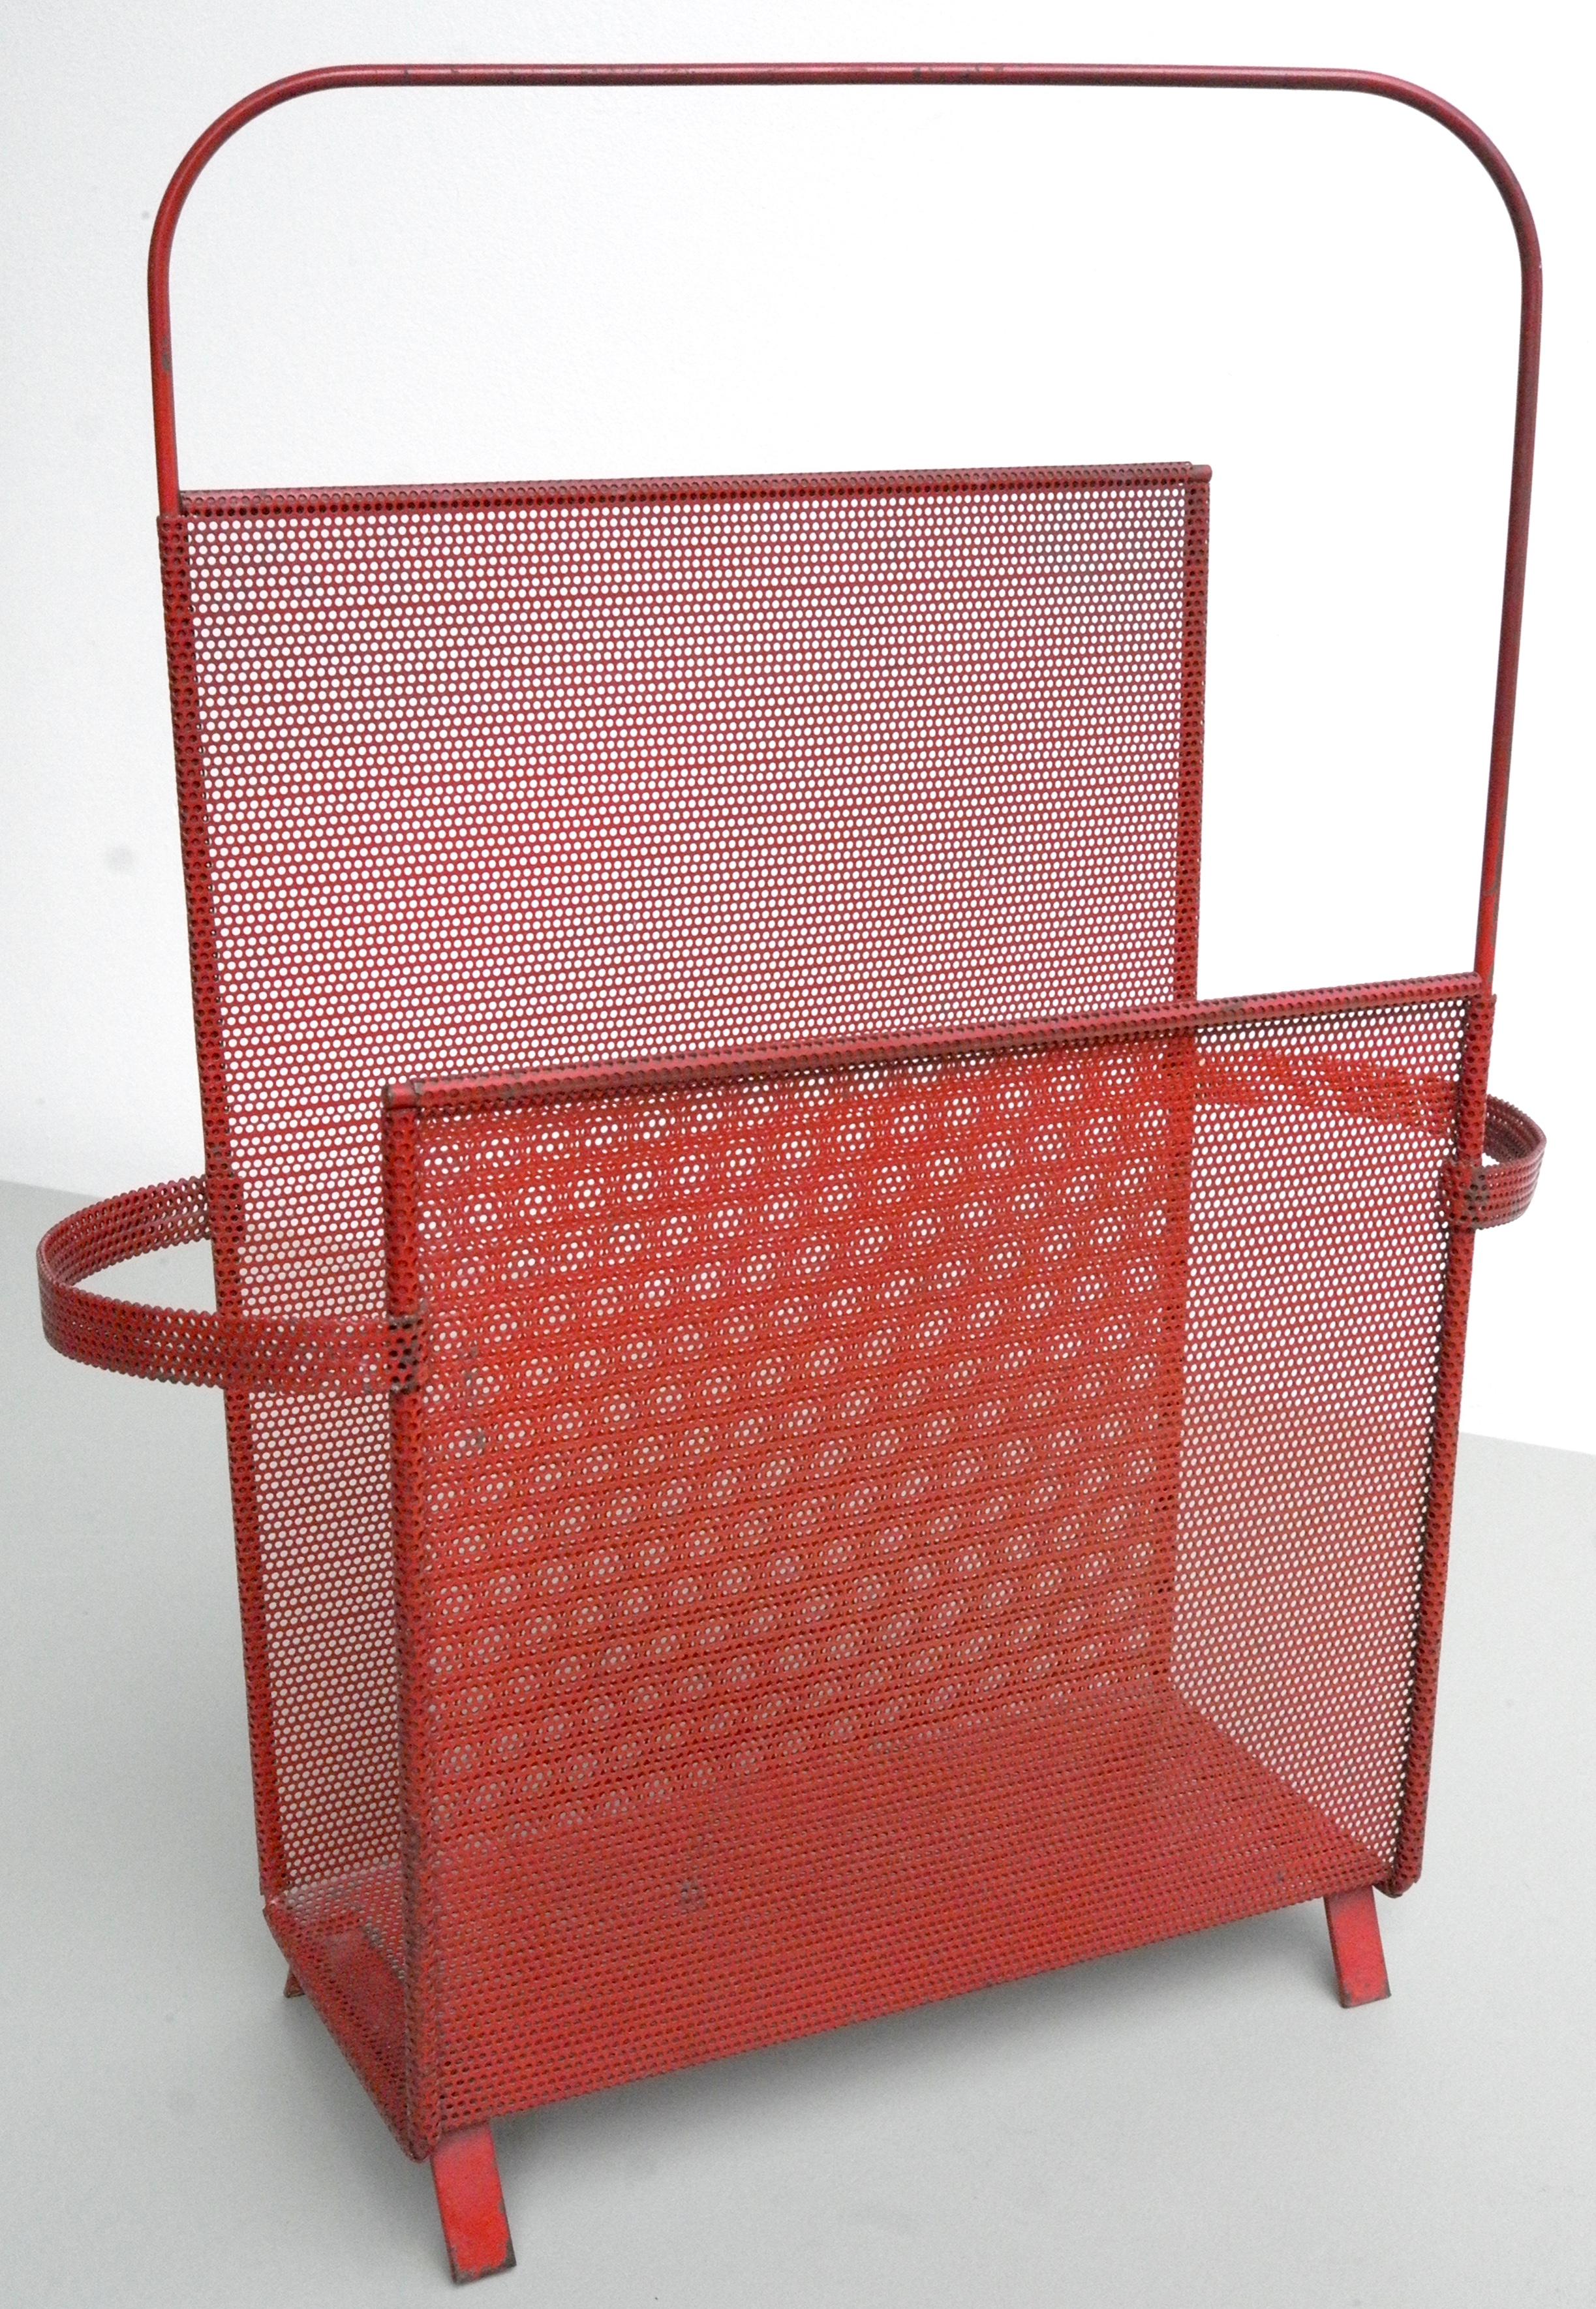 Magazine holder designed by Mathieu Matégot, rare Asymmetrical model in red metal. Manufactured by Ateliers Matégot, circa 1950. Folded, perforated metal.